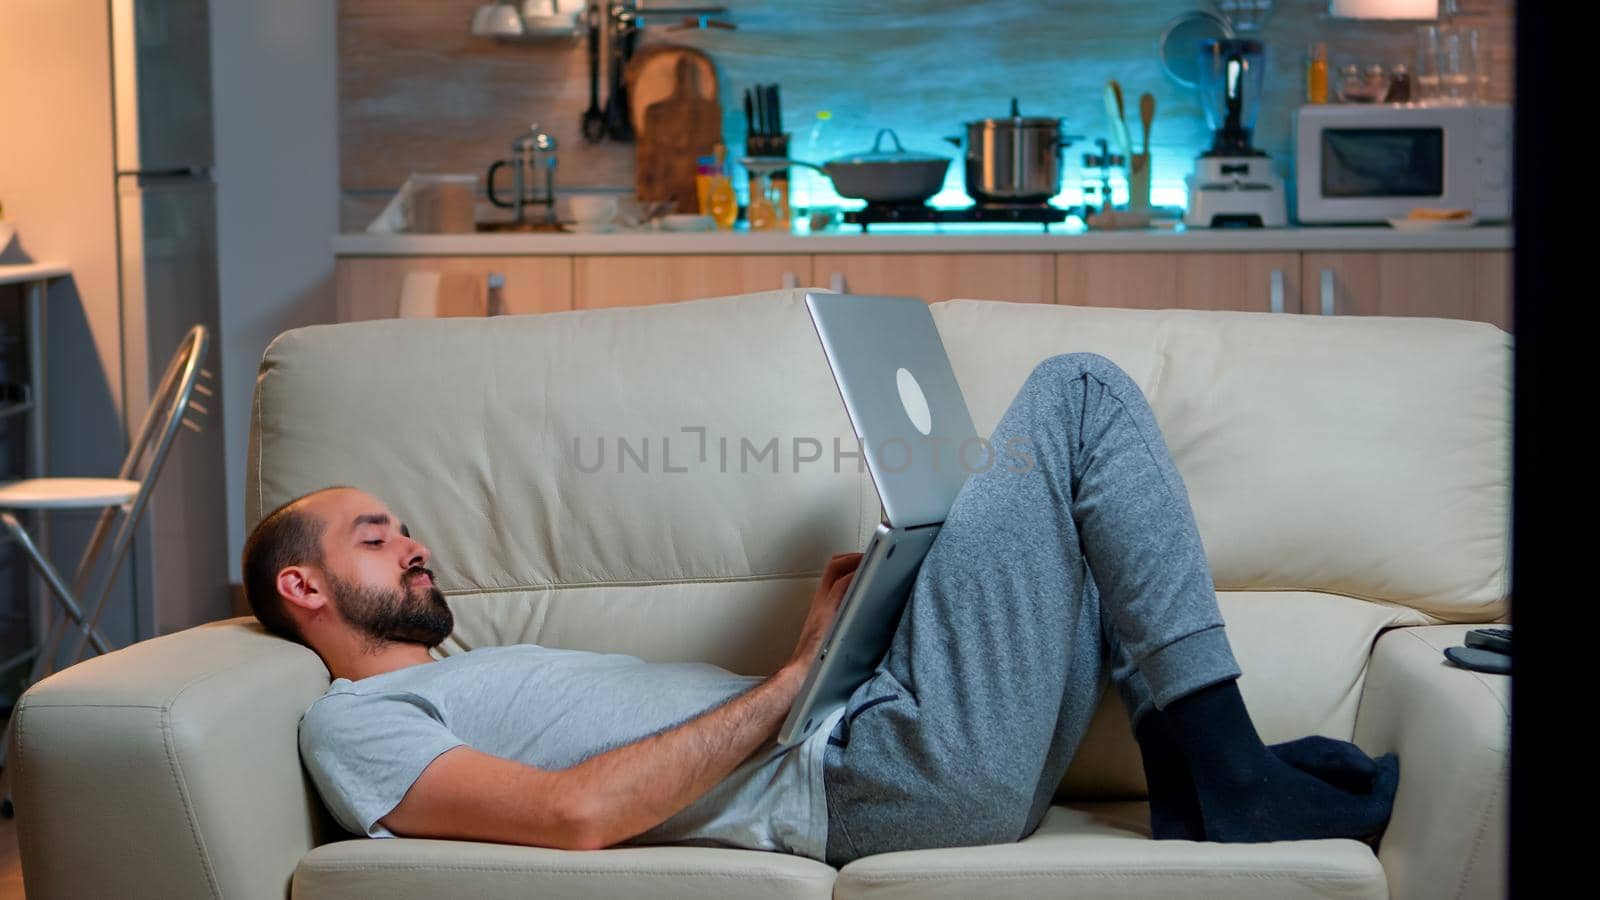 Man falling asleep in fron of TV while working on the laptop by DCStudio